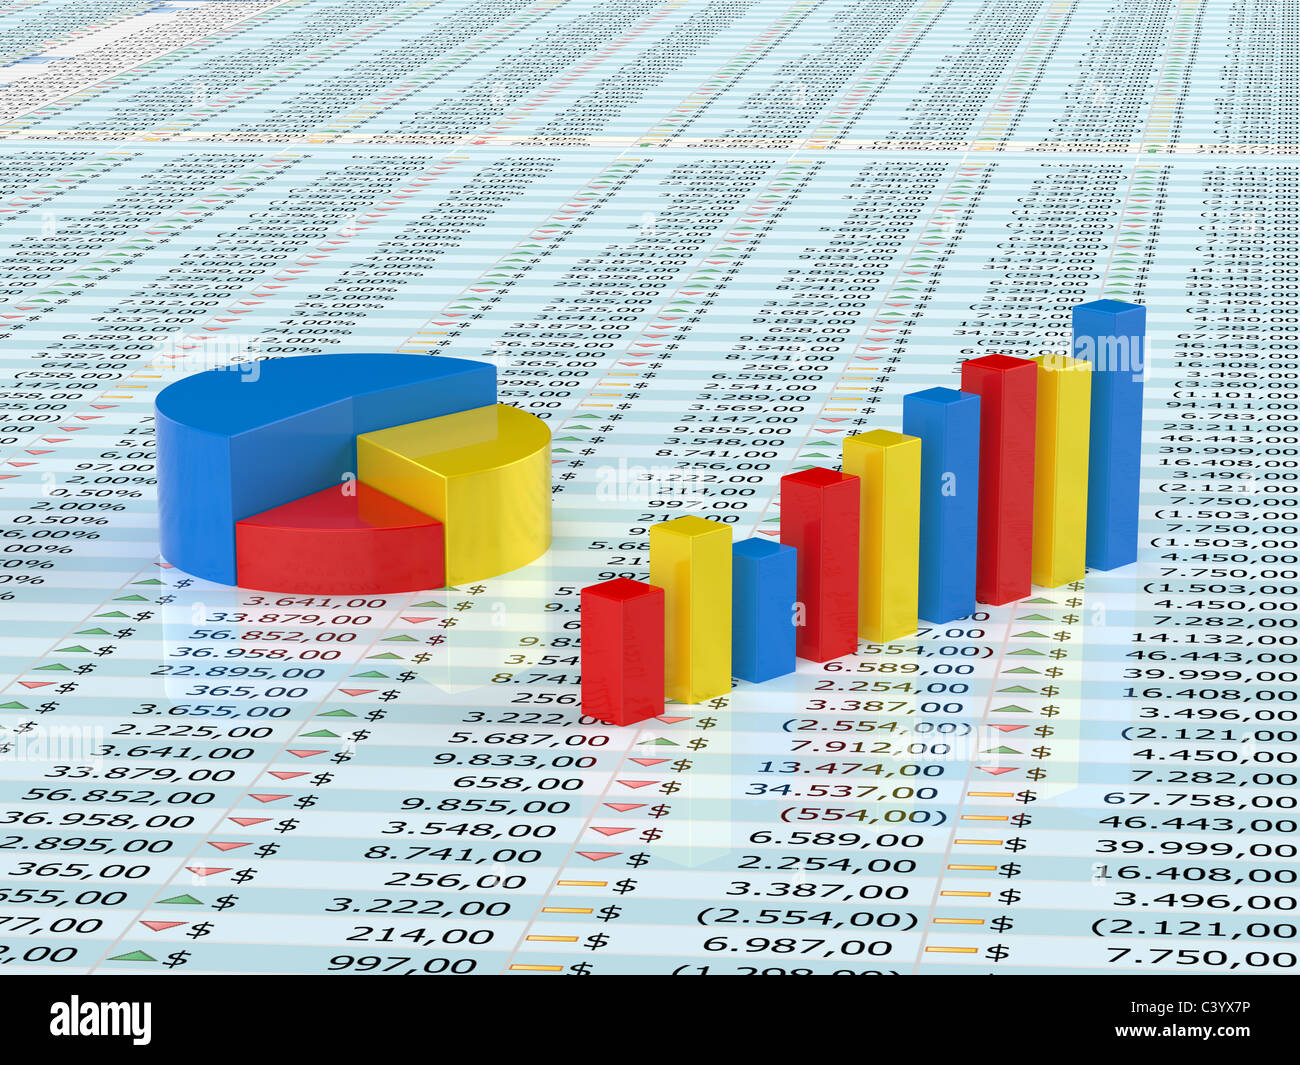 Spreadsheet with blue,yellow and red graph bars with numbers in background Stock Photo